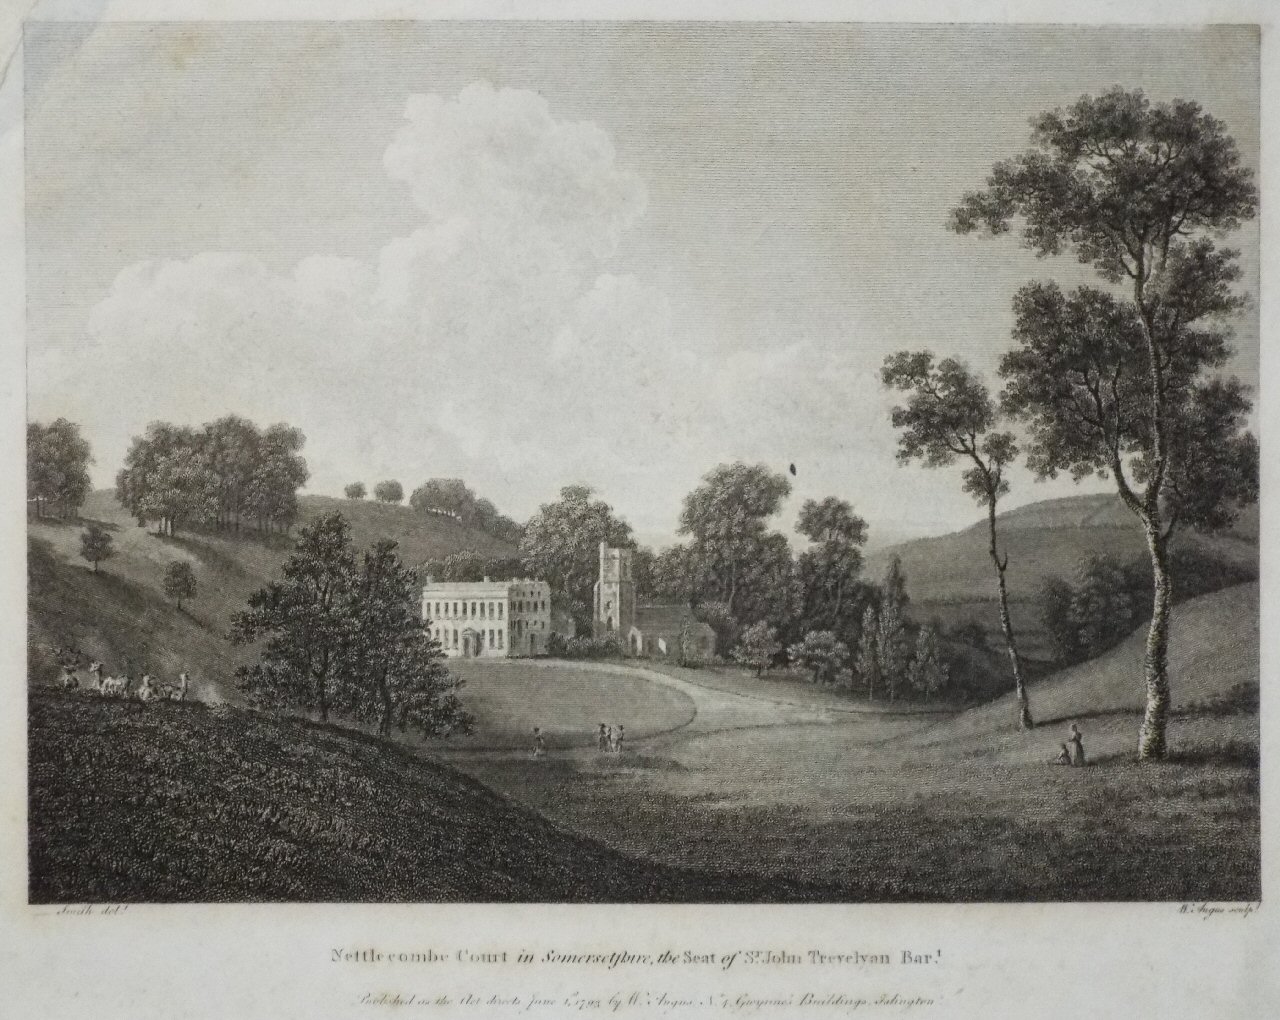 Print - Nettlecombe Court in Somersetshire, the Seat of St. John Trevelyan Bart.. - Angus